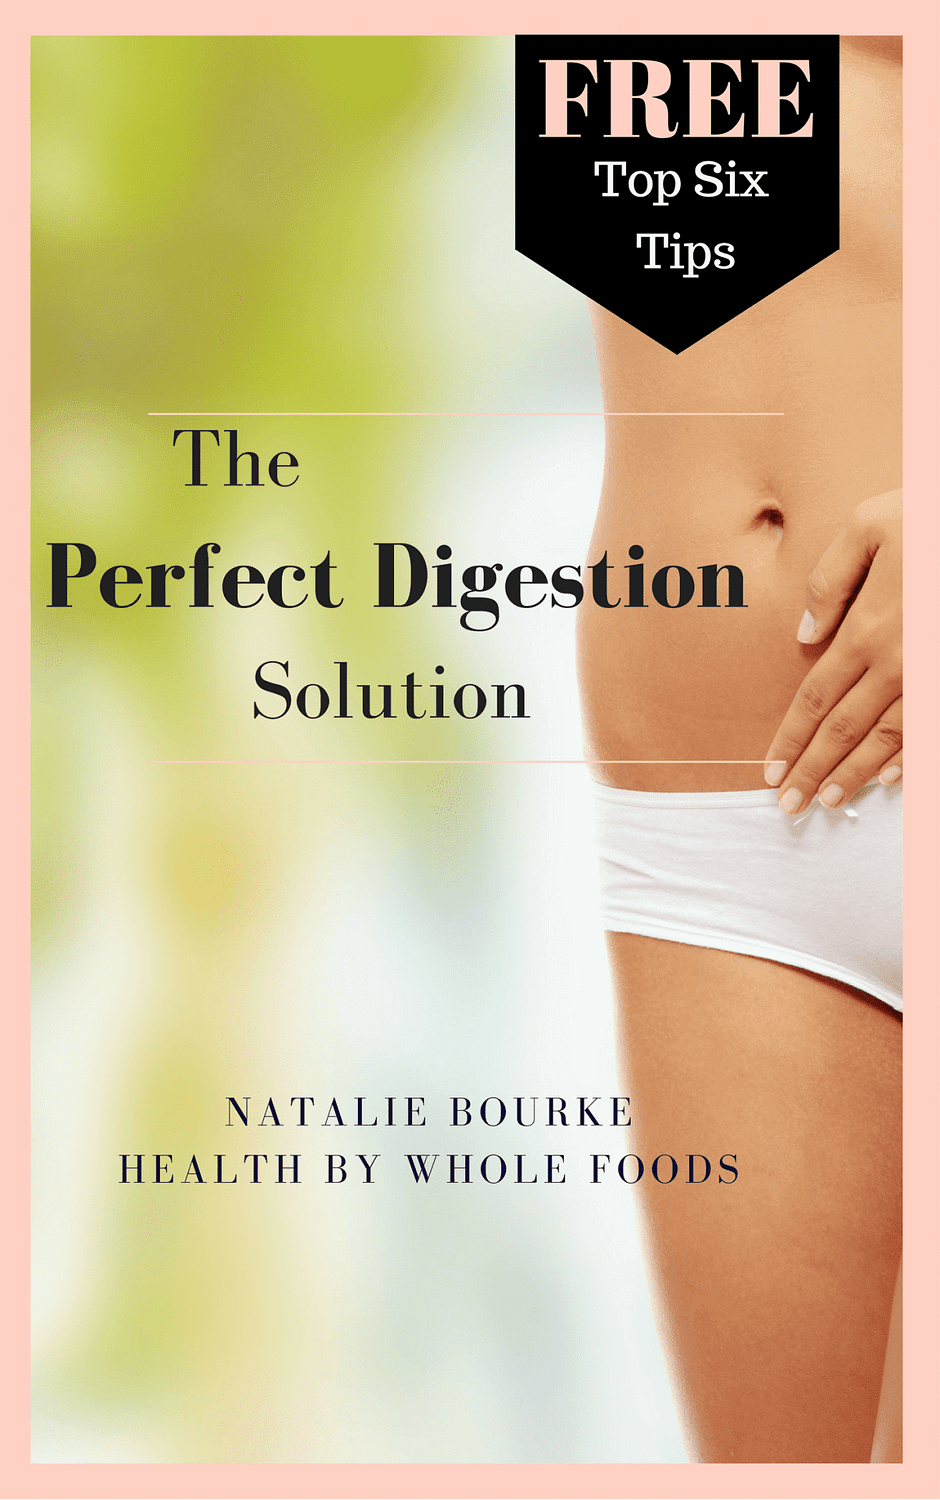 The Perfect Digestion Solution by Natalie K. Douglas